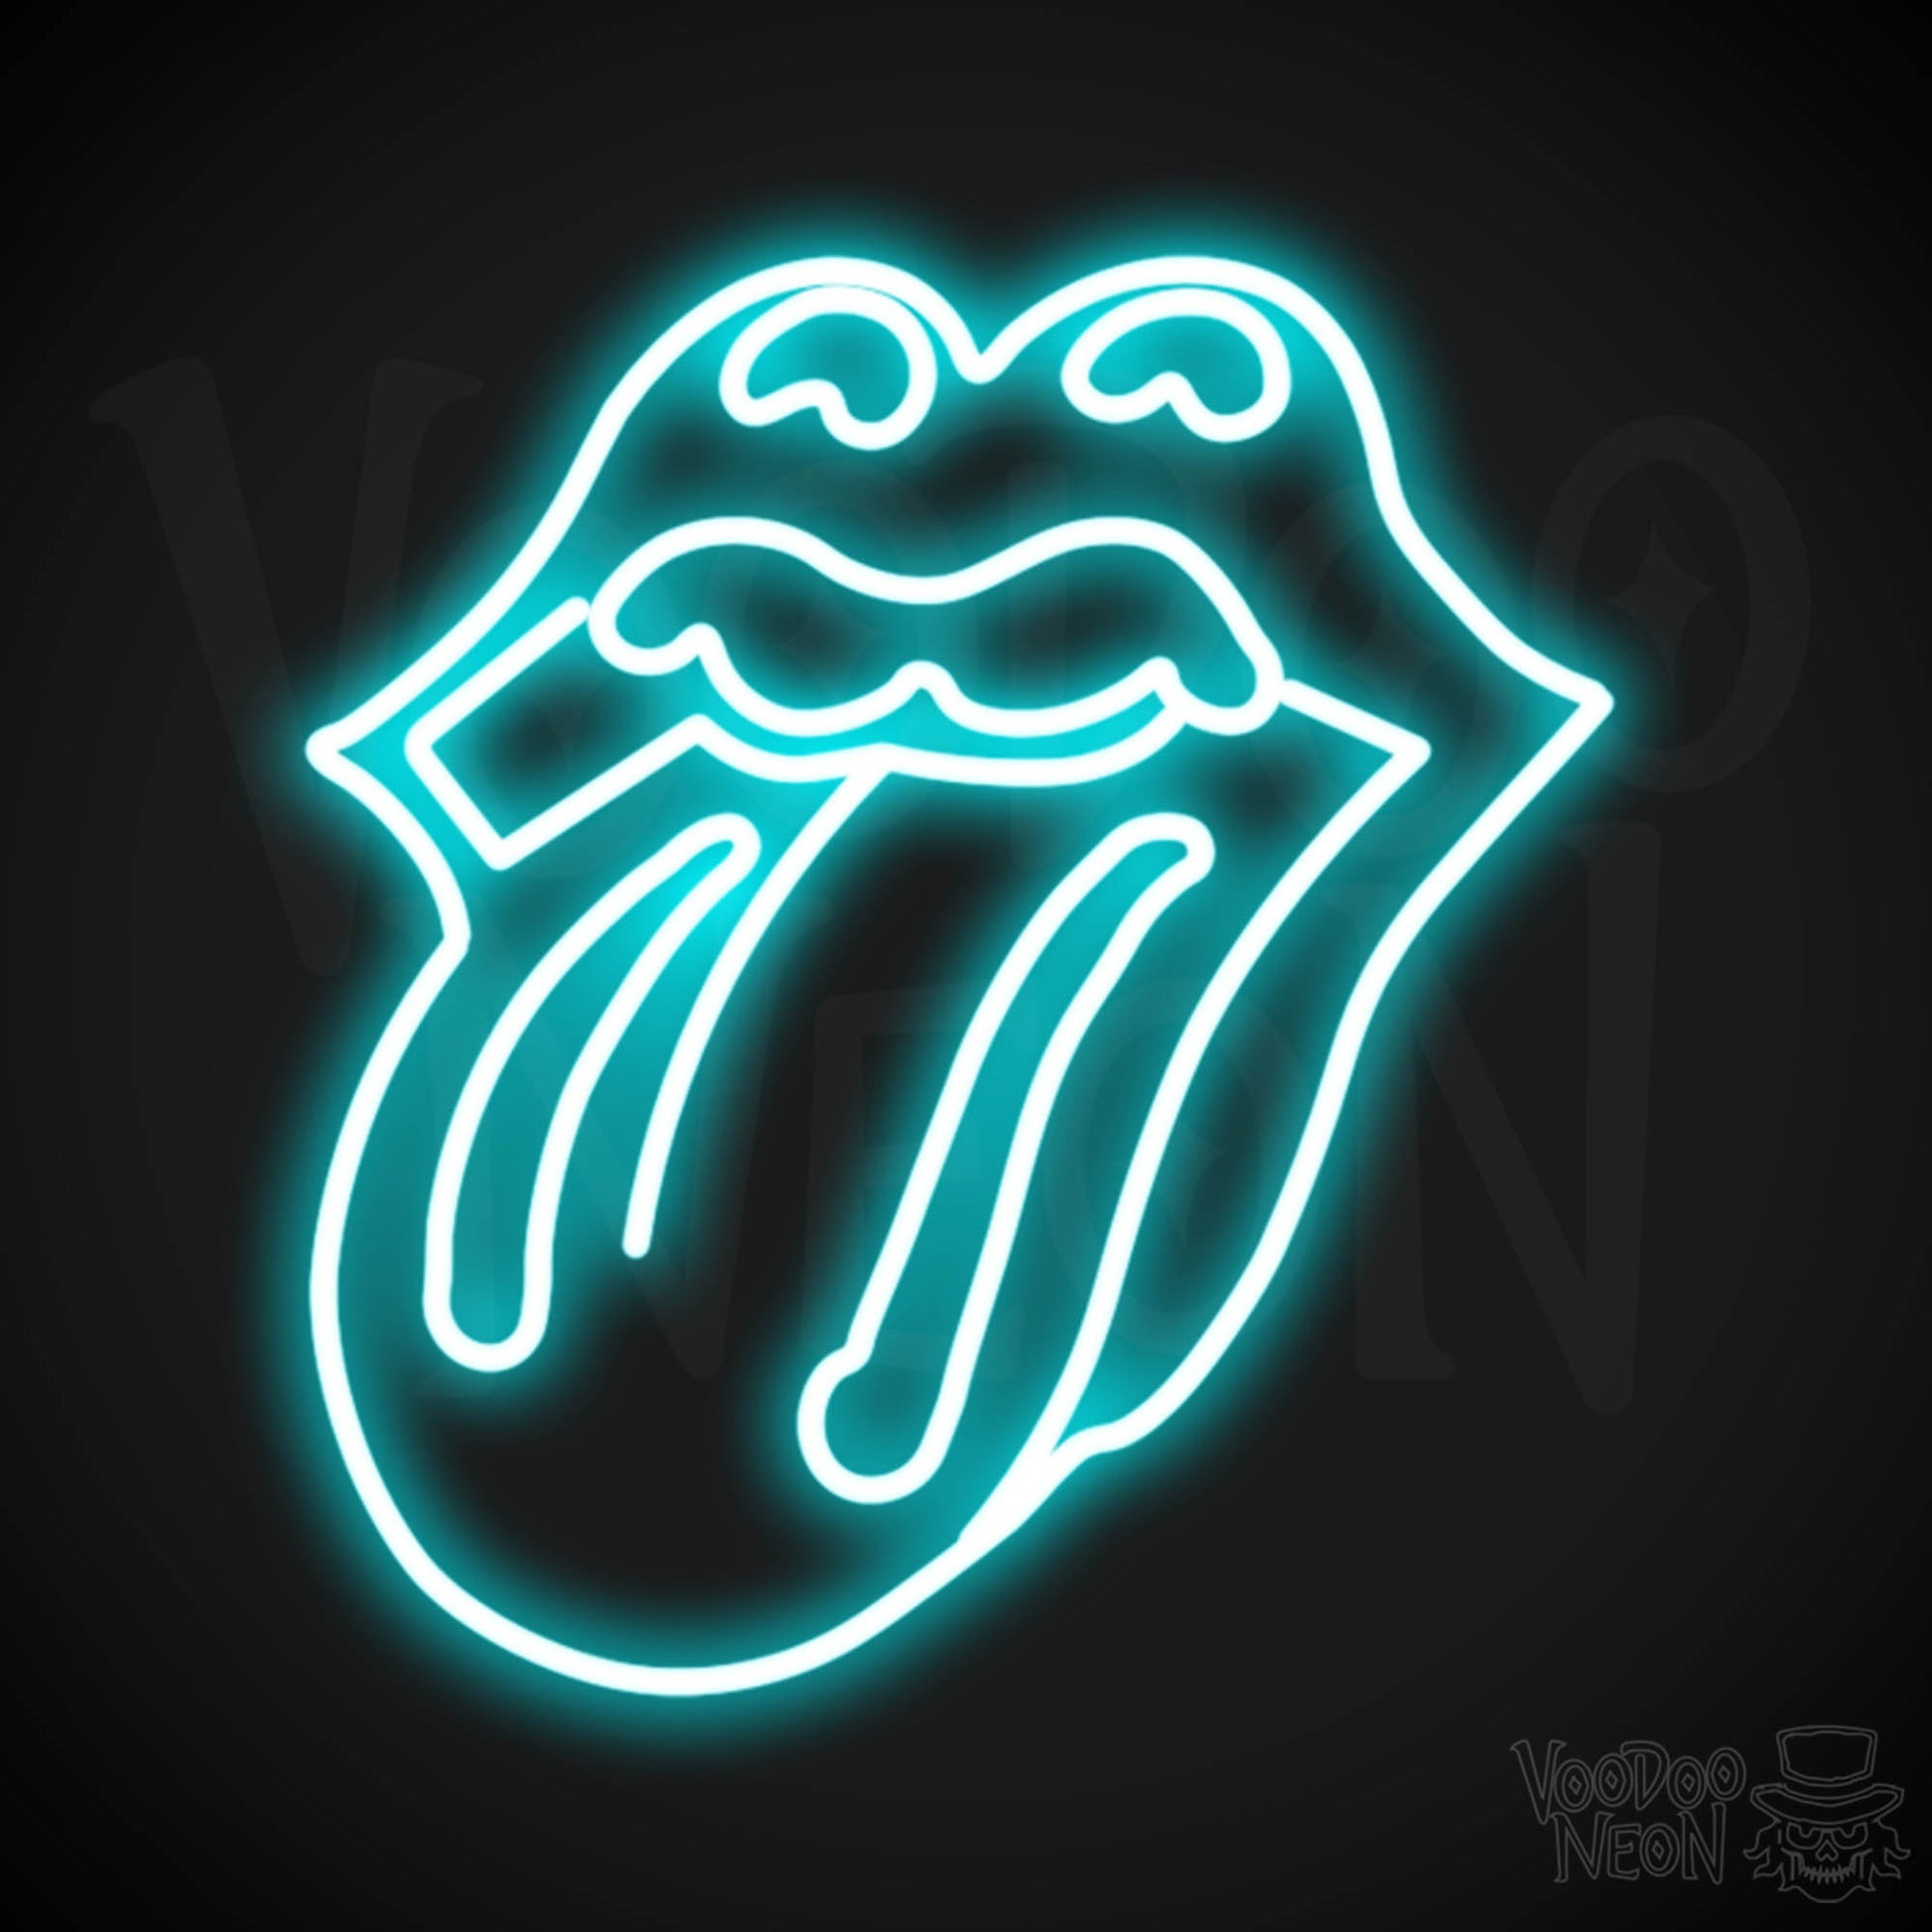 Rolling Stones Neon Sign - Rolling Stones Sign - Neon Rolling Stones Logo Wall Art - Color Ice Blue